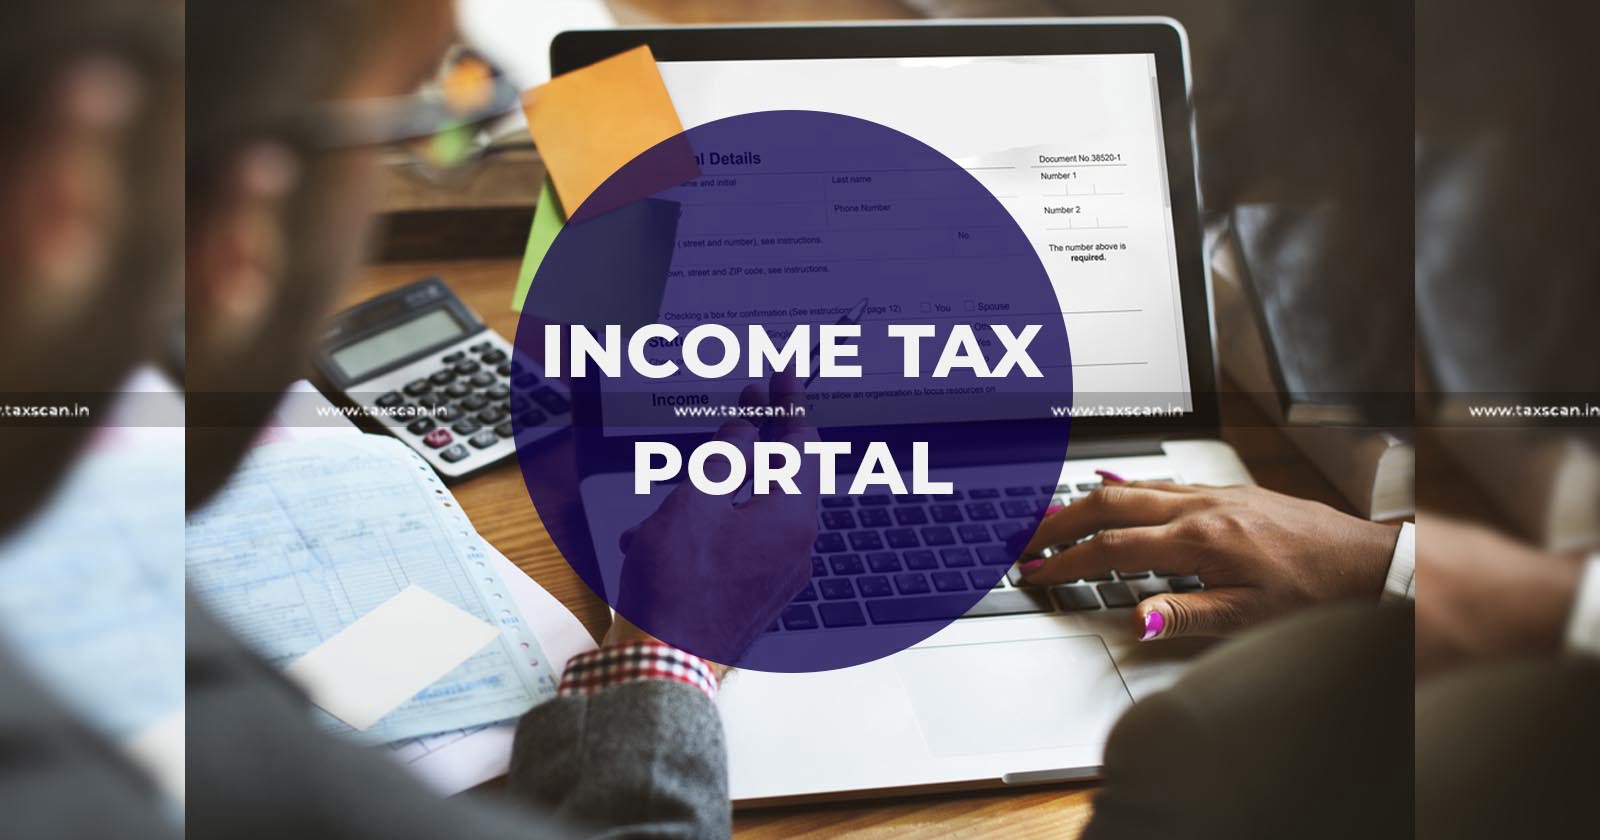 ITR filing: What is the co-browsing feature on Income Tax website for taxpayers?